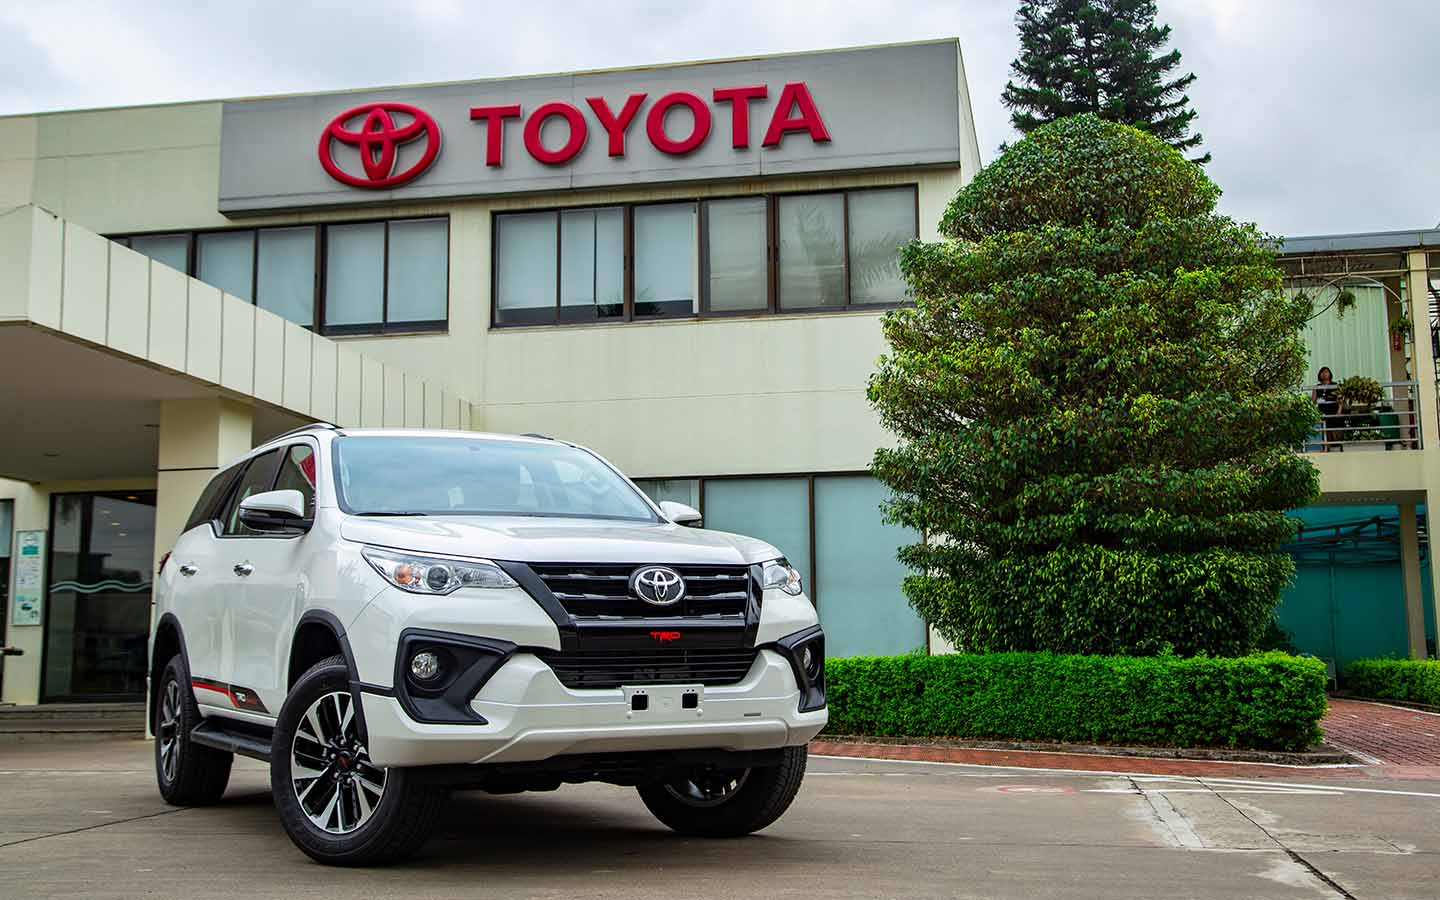 the Toyota fortuner has a dominating exterior design